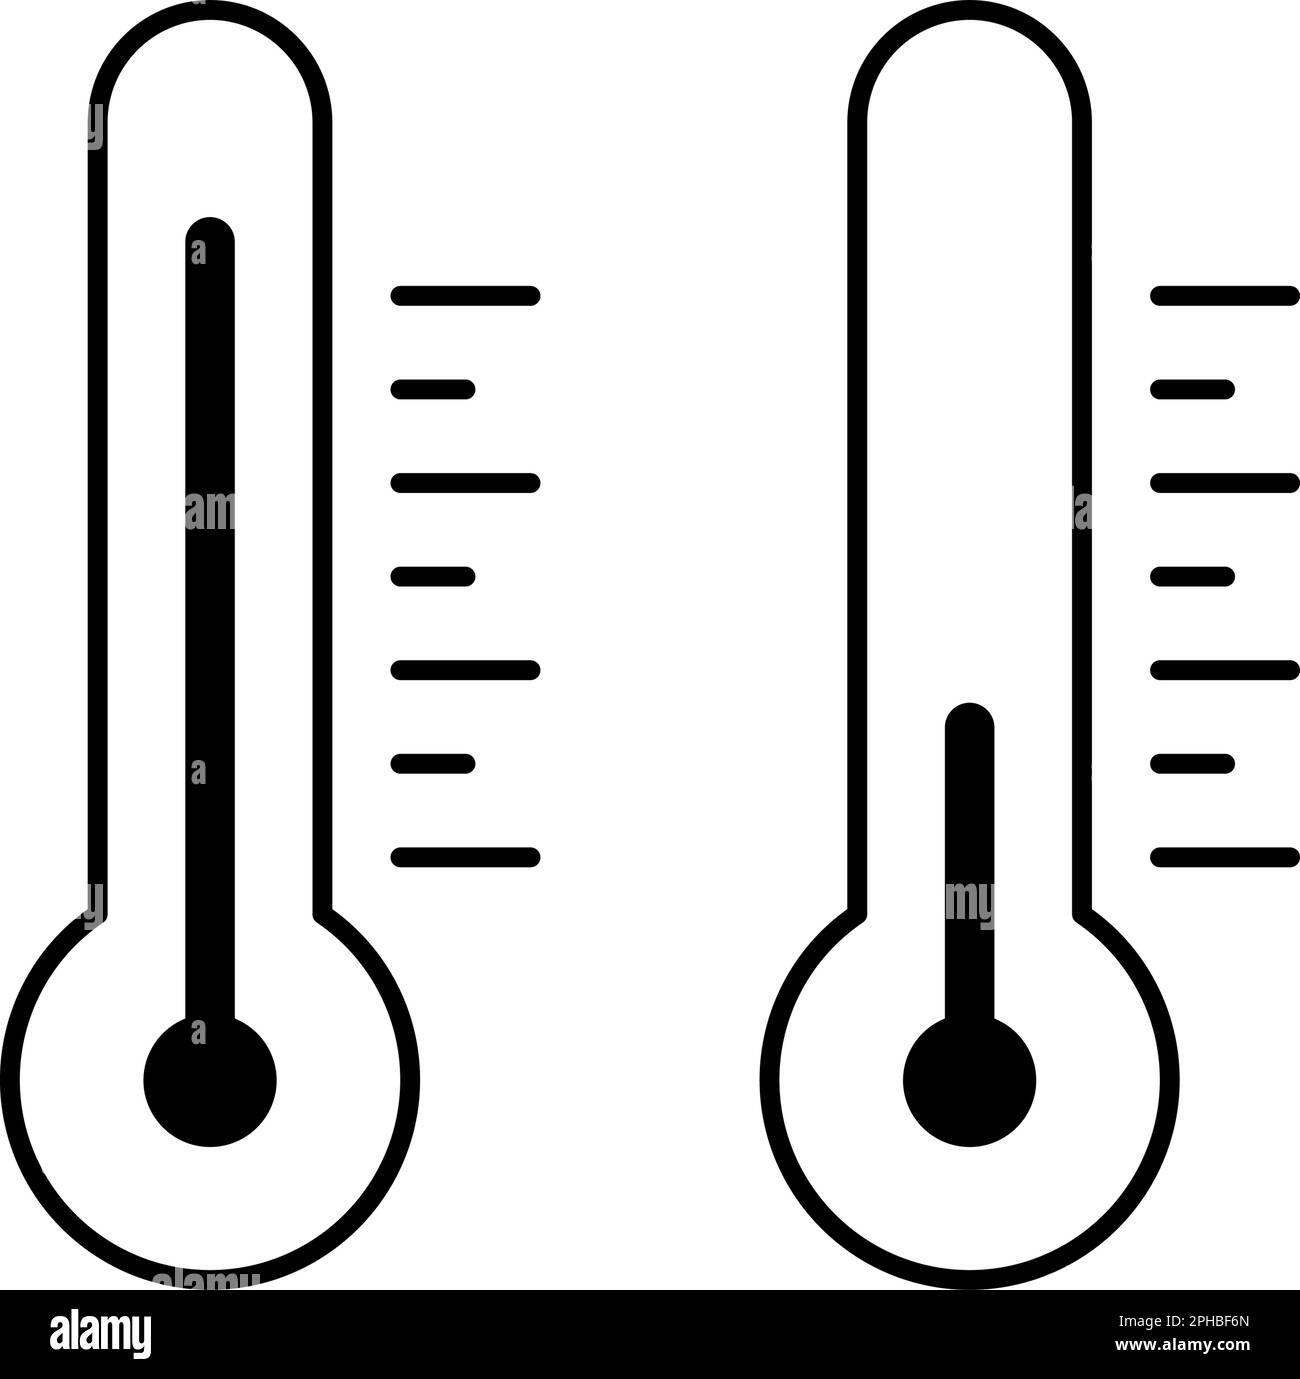 Weather temperature thermometer black icon. Thermometer with cold and ...